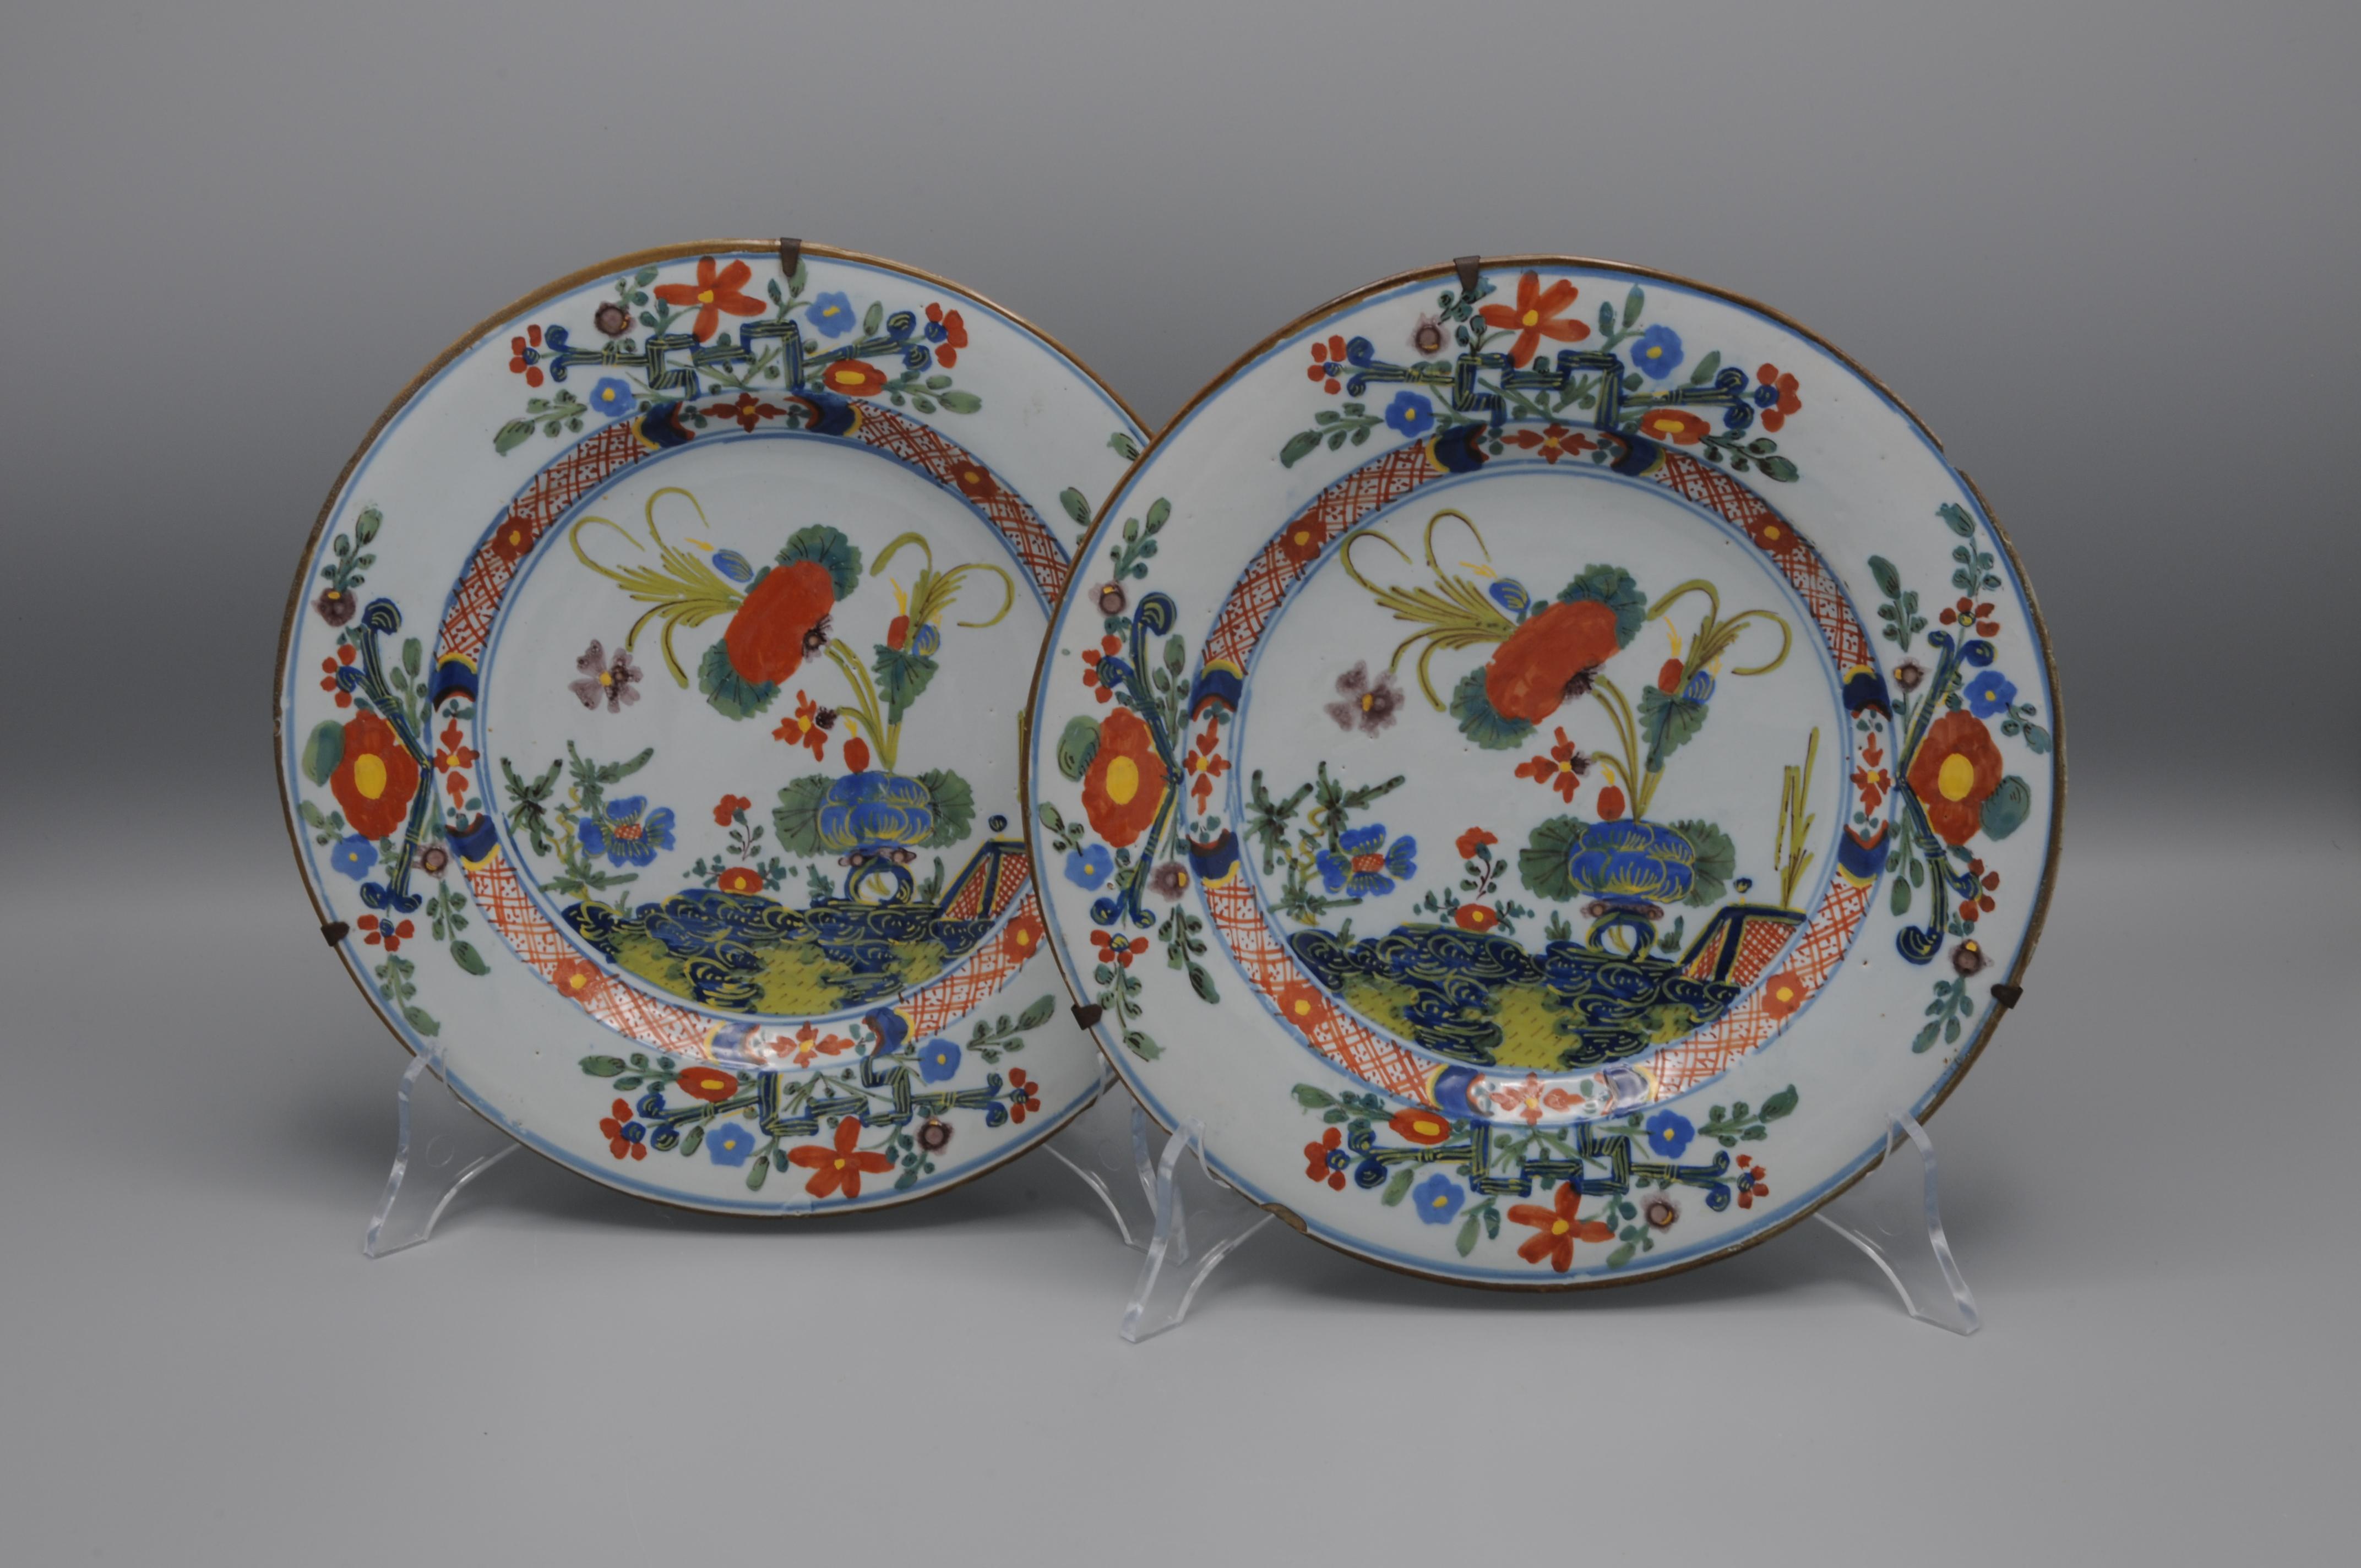 Set of 2 late 18th century Faenza plates with the famous carnation decor 'Garofano' 

The Garofano design was initially developed in the Italian region of Lombardia, but it later became a world-famous signature-pattern from the Majolica town of